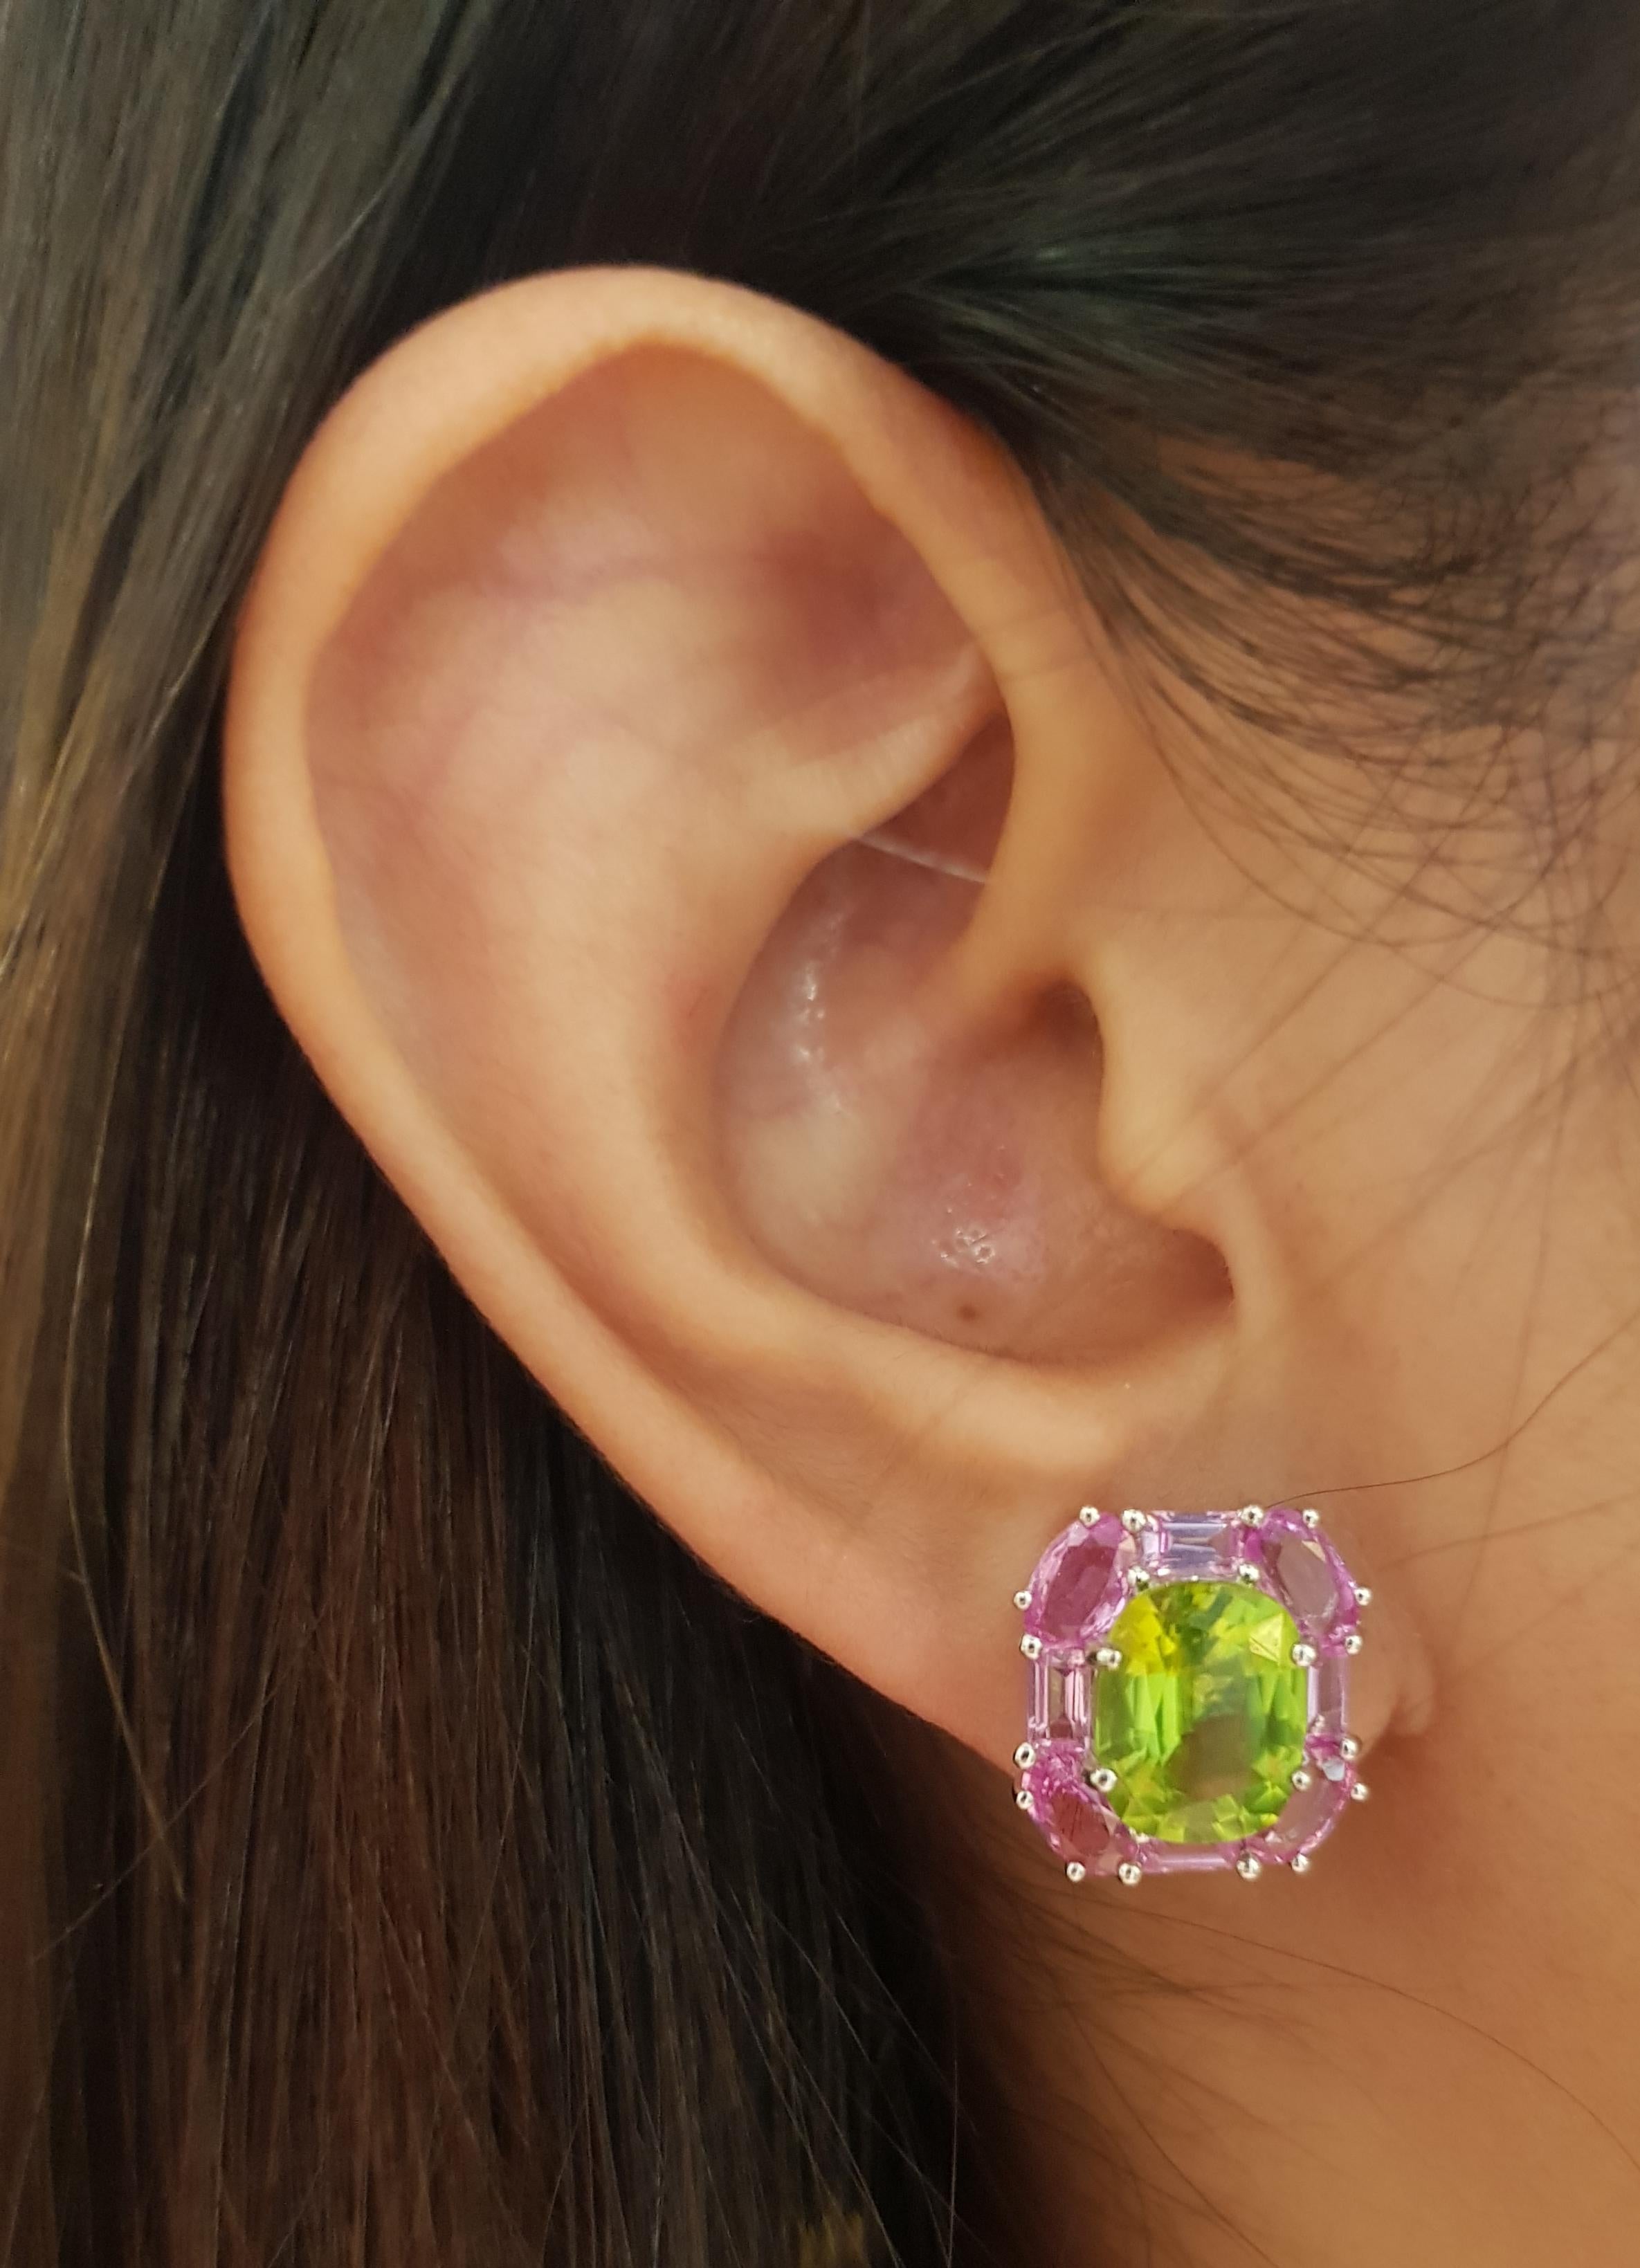 Peridot 5.76 carats with Pink Sapphire 5.62 carats Earrings set in 18 Karat White Gold Settings

Width:  1.4 cm 
Length: 1.5 cm
Total Weight: 10.26 grams



